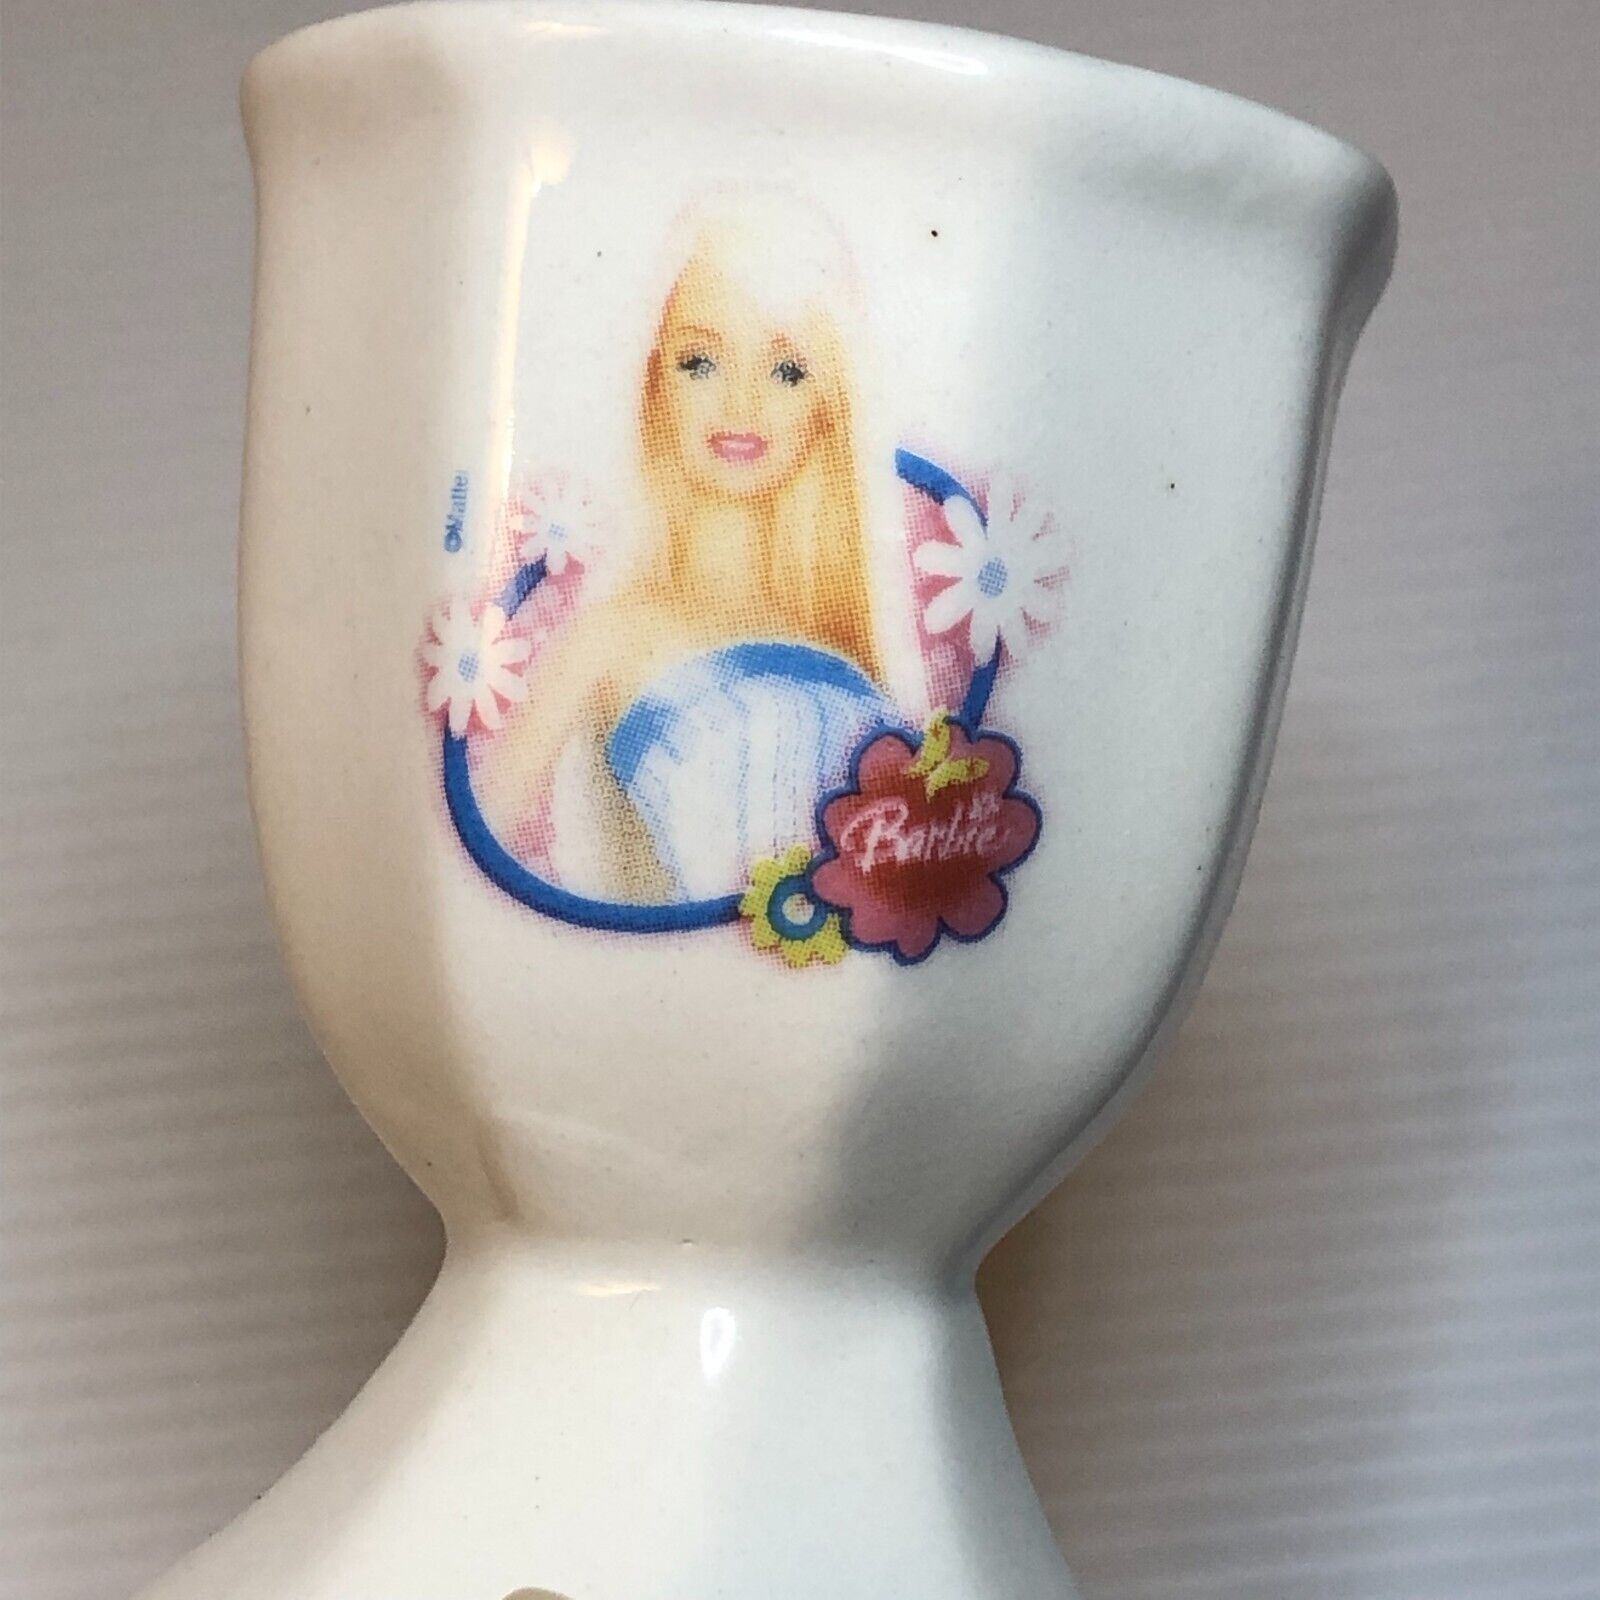 Barbie Theme Ceramic Egg Cup 6.5cm tall  - Barbie collectable